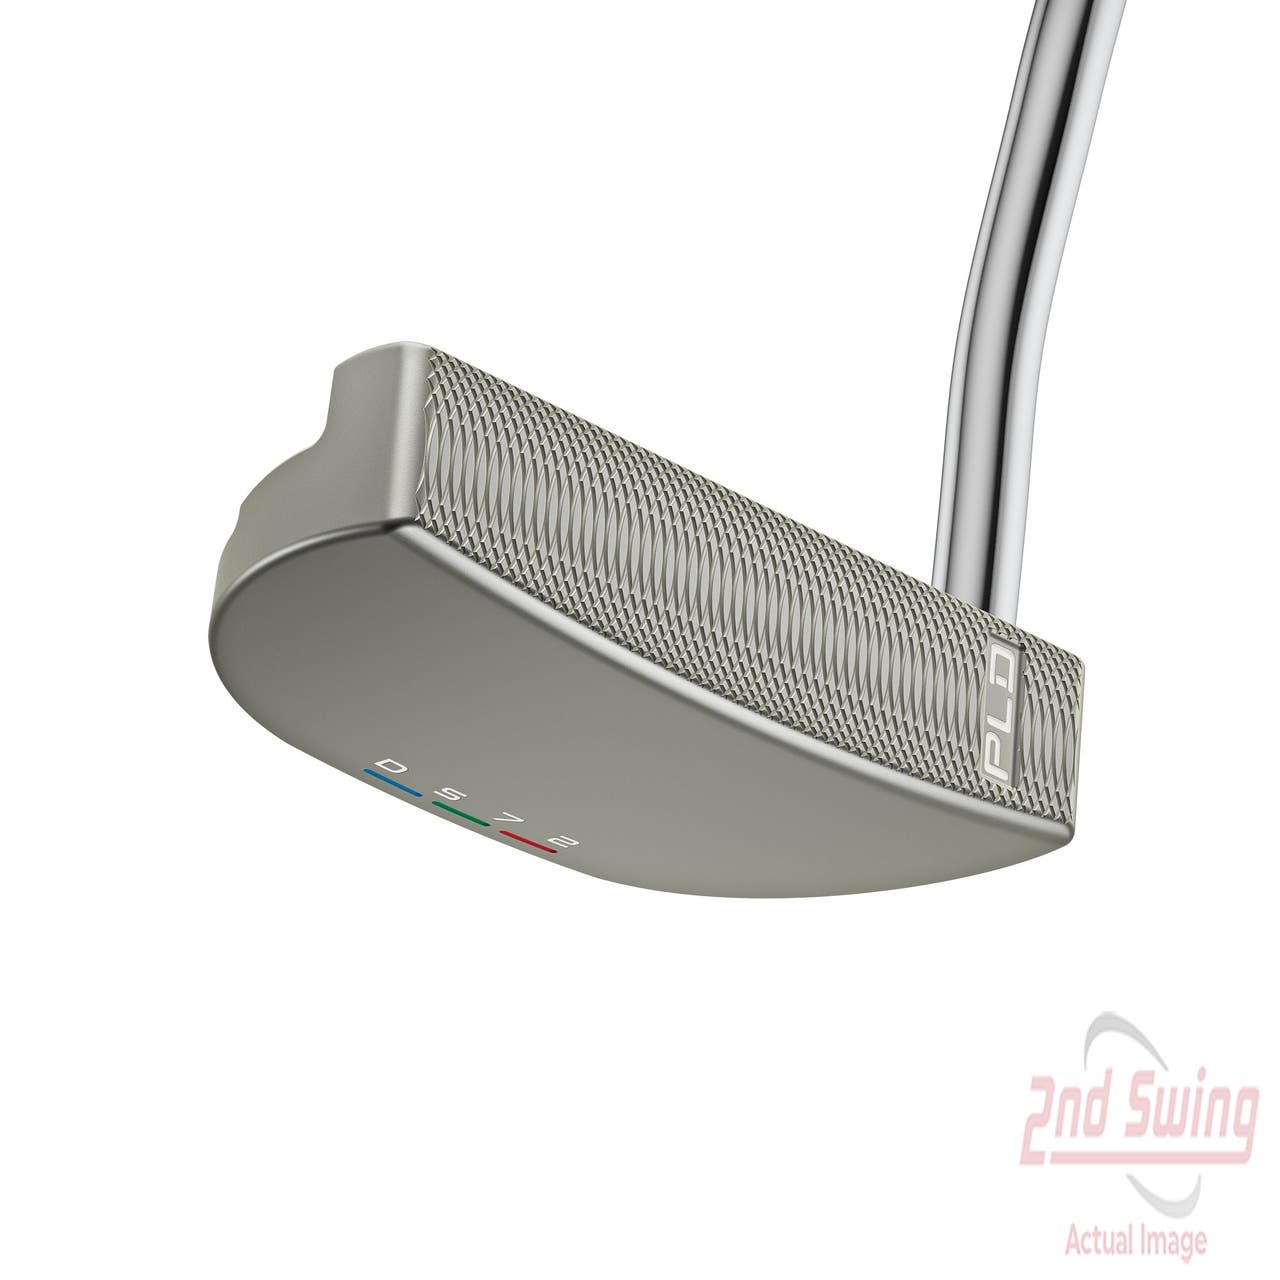 Ping PLD Milled DS72 Putter